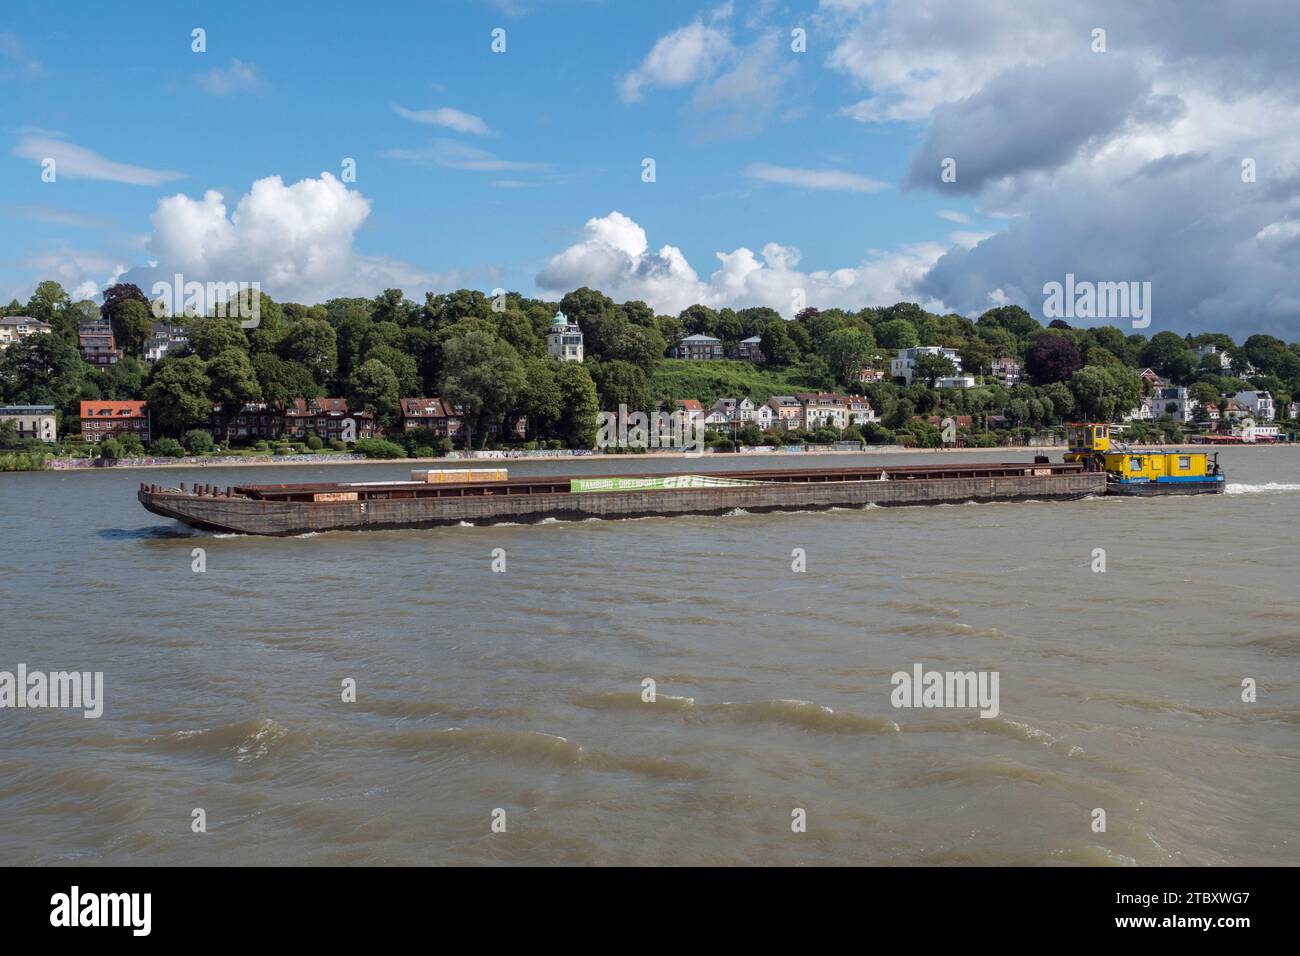 The Schub Express 10 inland pushboat pushing a large barge along the River Elbe, viewed from the 62 HADAG ferry in Hamburg, Germany. Stock Photo